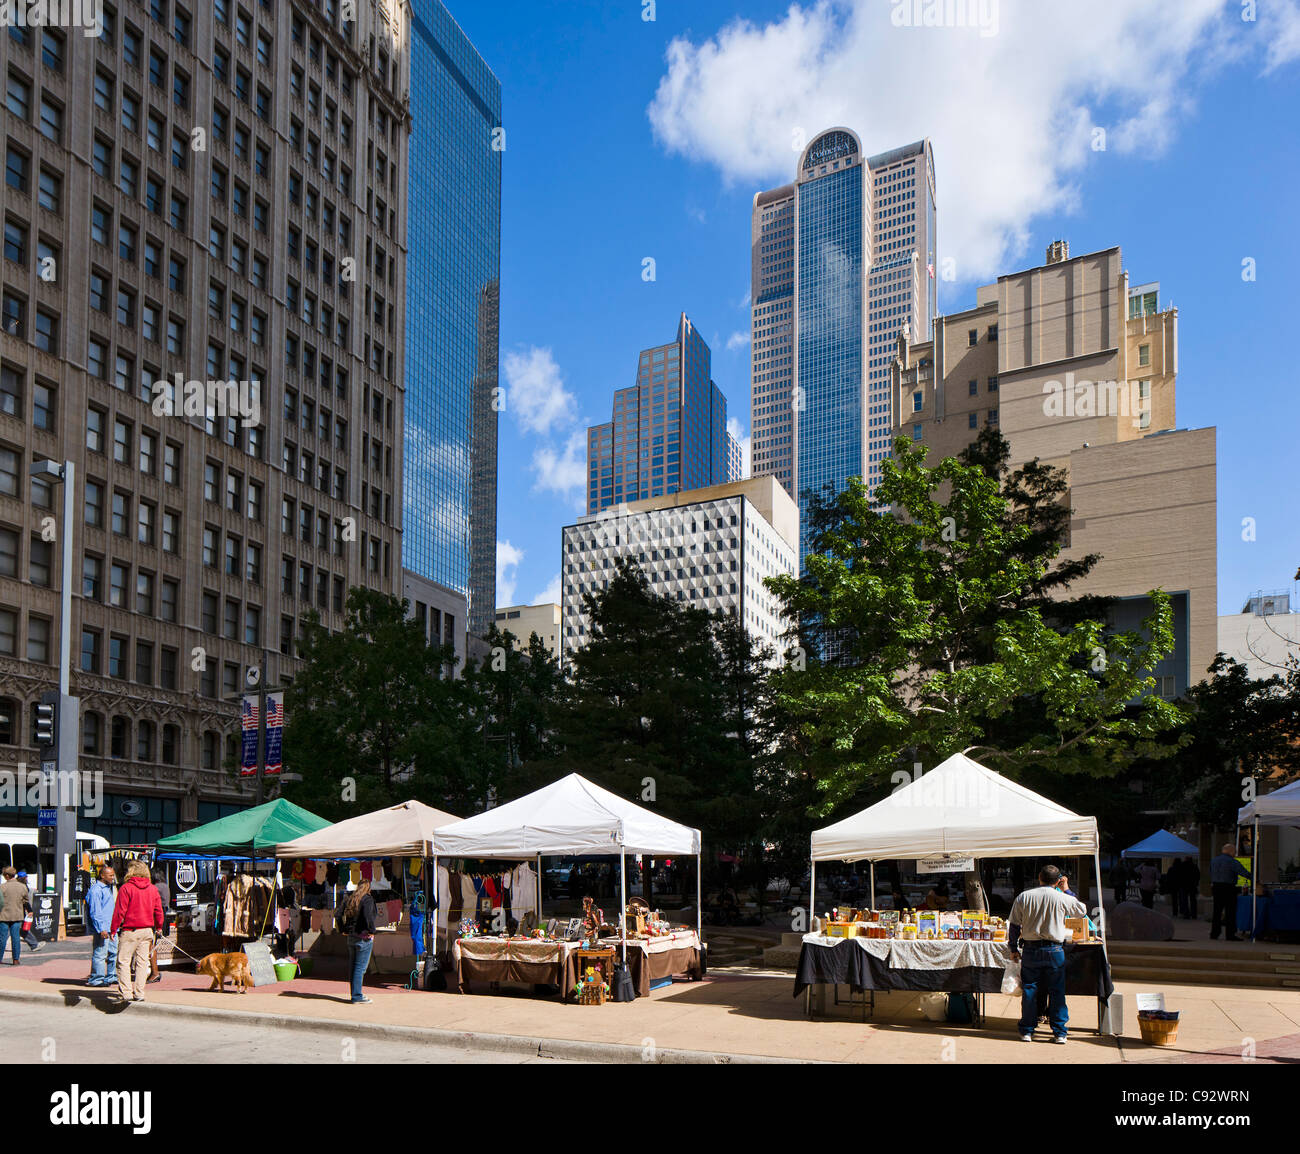 Pegasus Plaza Outdoor Market at the intersection with N Akard Street in the business district, Dallas, Texas, USA Stock Photo